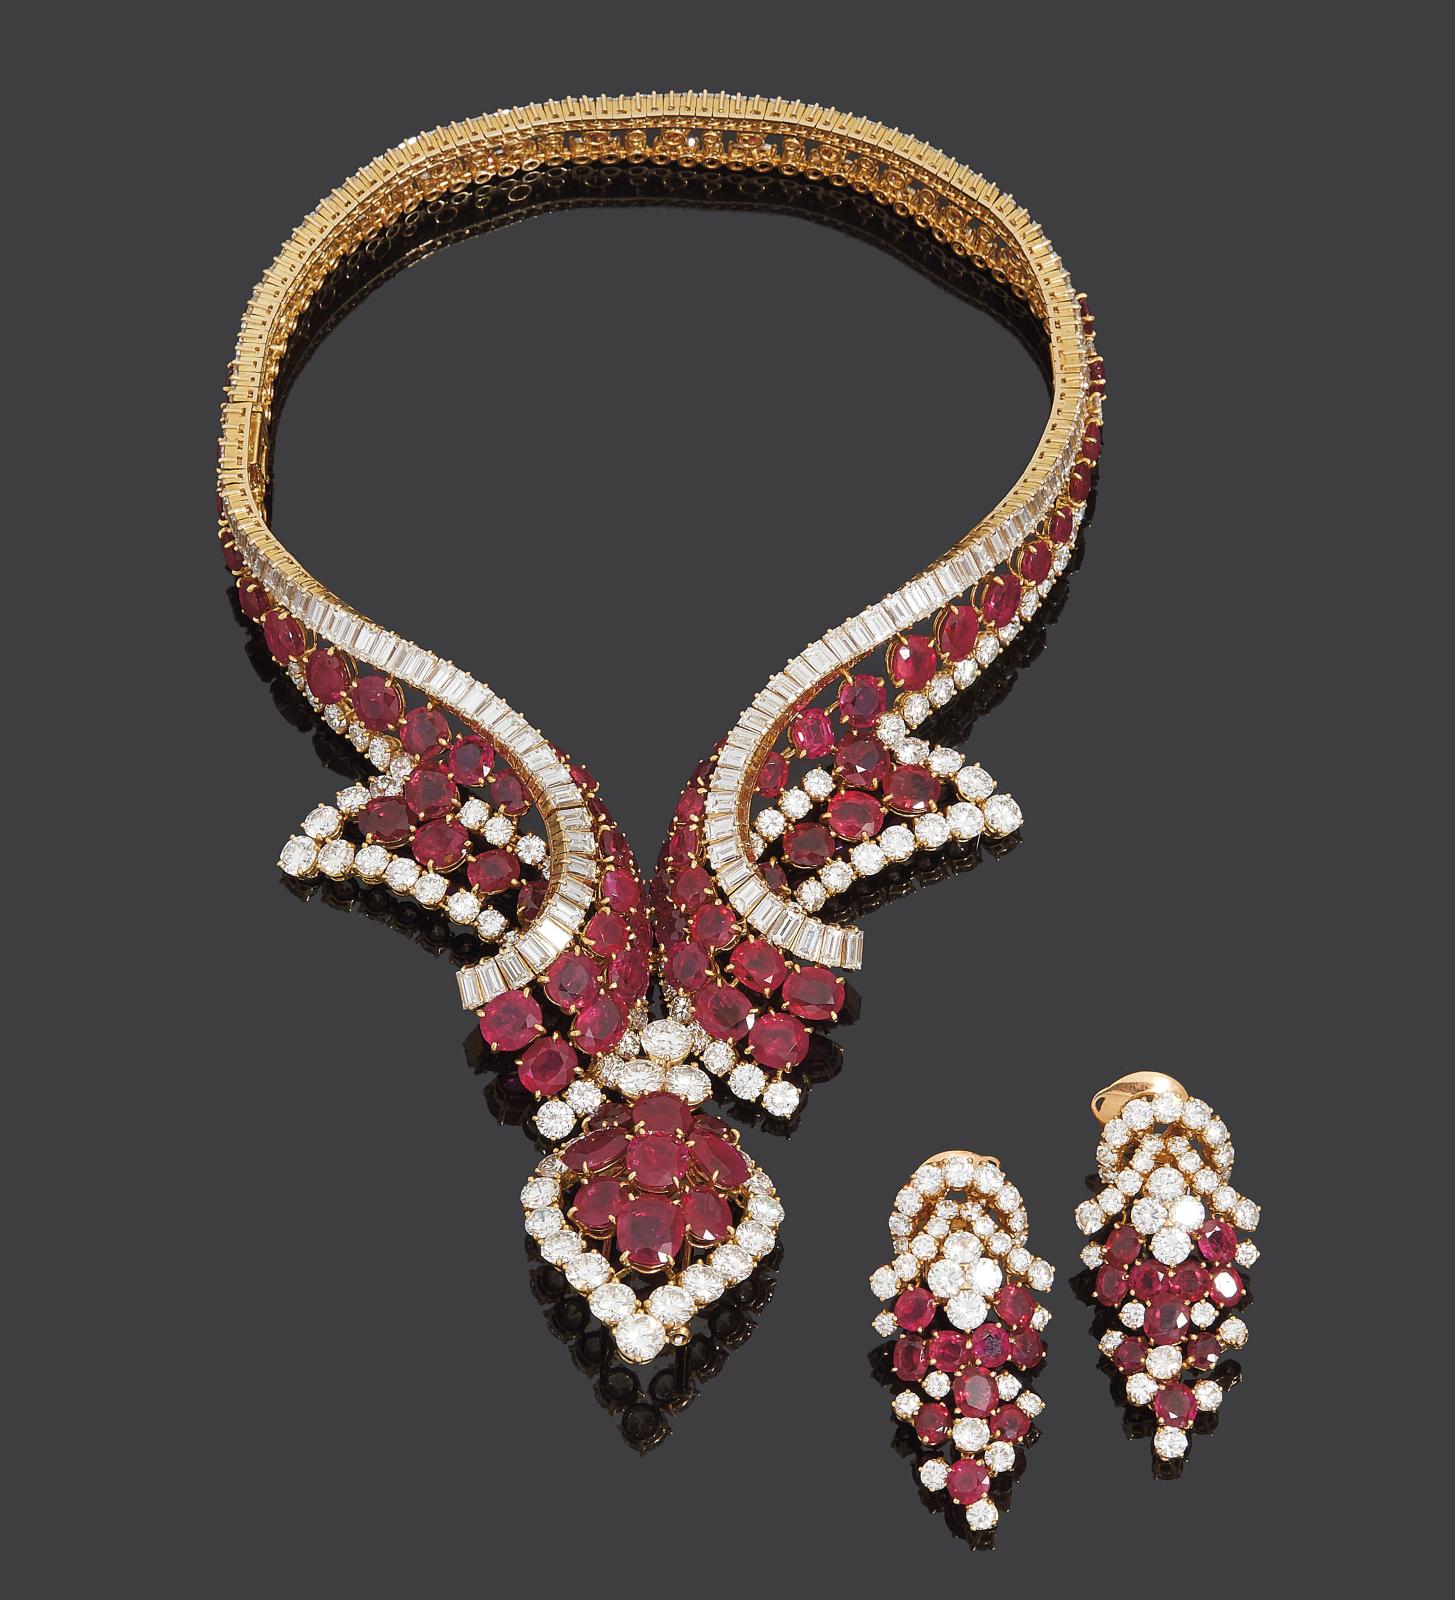 The Medicis celebrated in jewelry